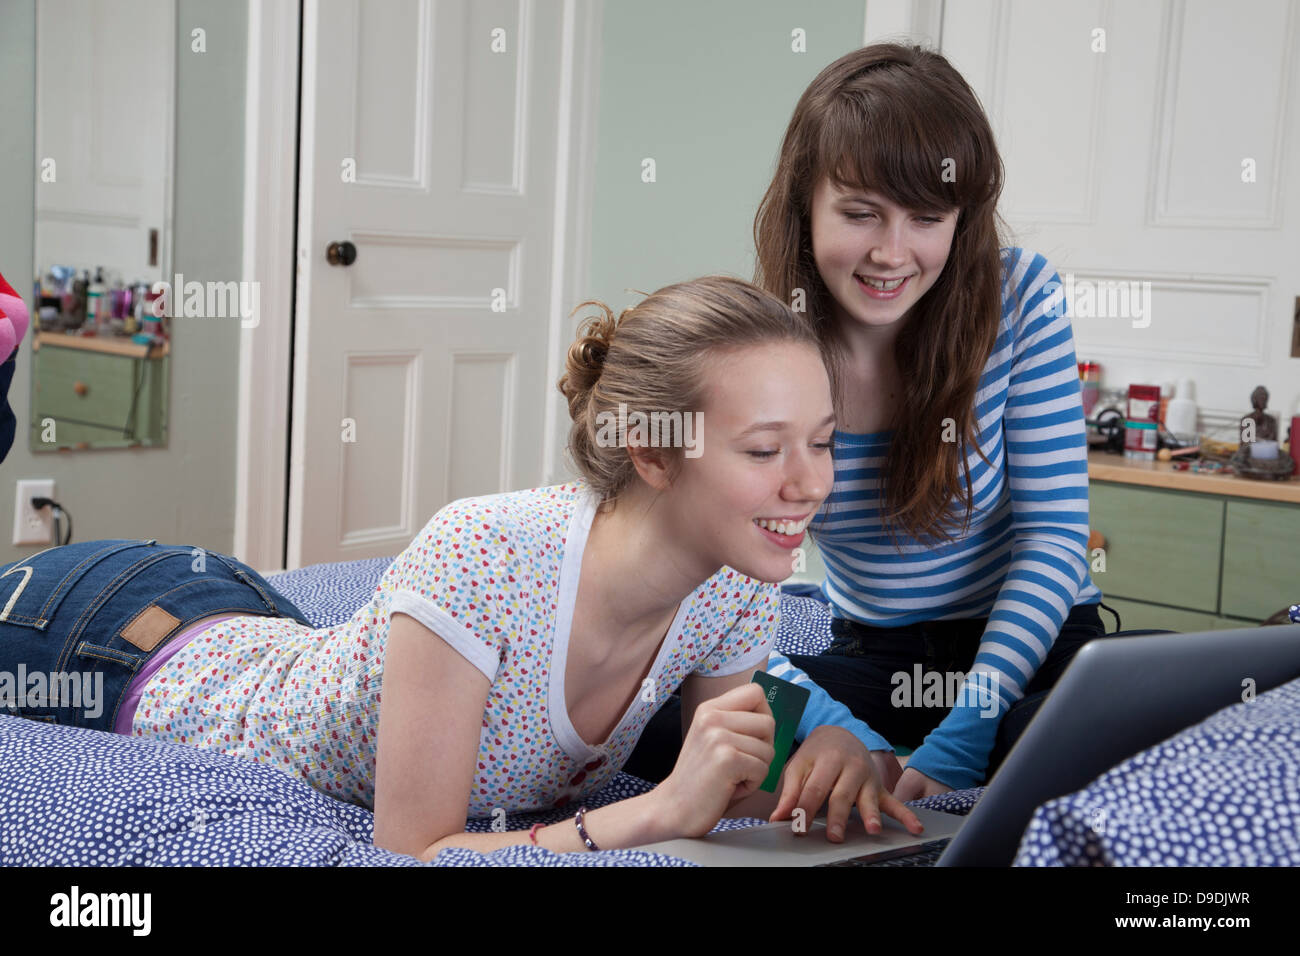 Girls lying on bed with laptop internet shopping Banque D'Images